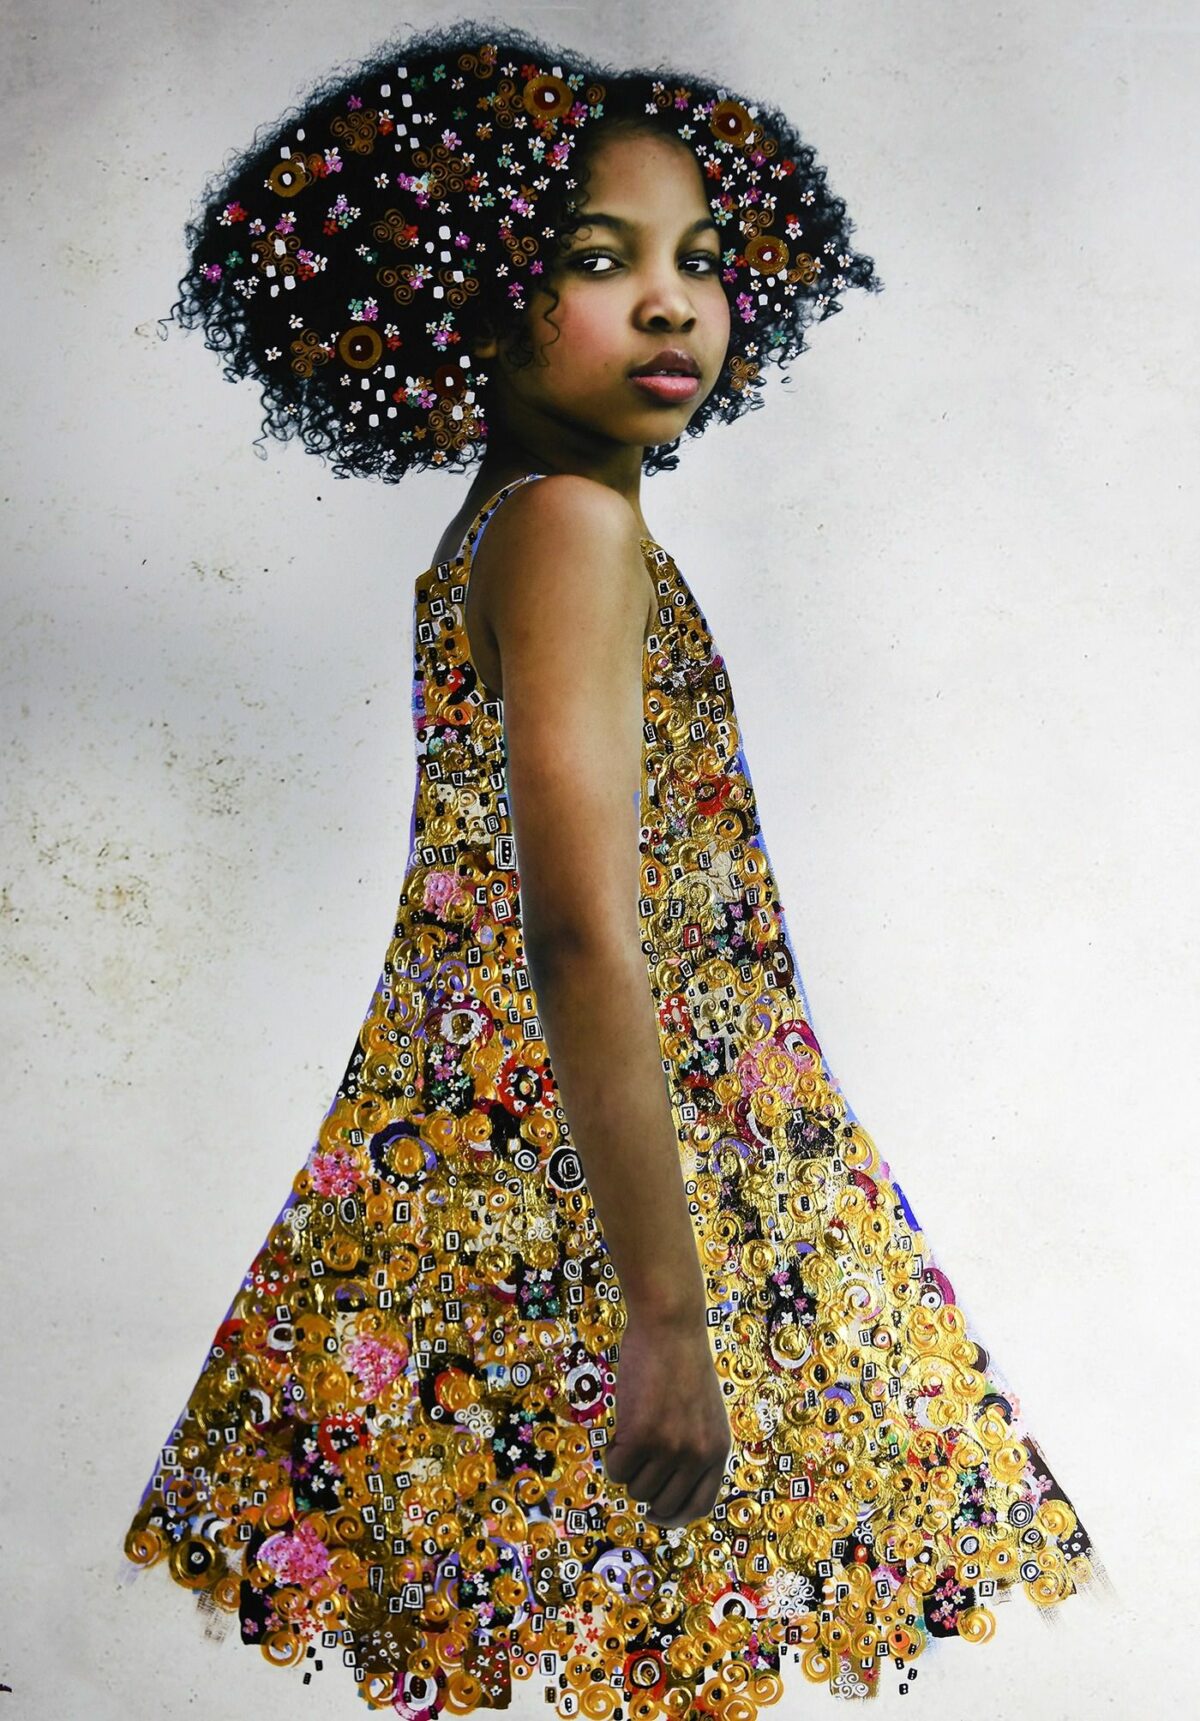 The Redemption Gorgeous Portraits Embellished With Gold Details By Tawny Chatmon 4